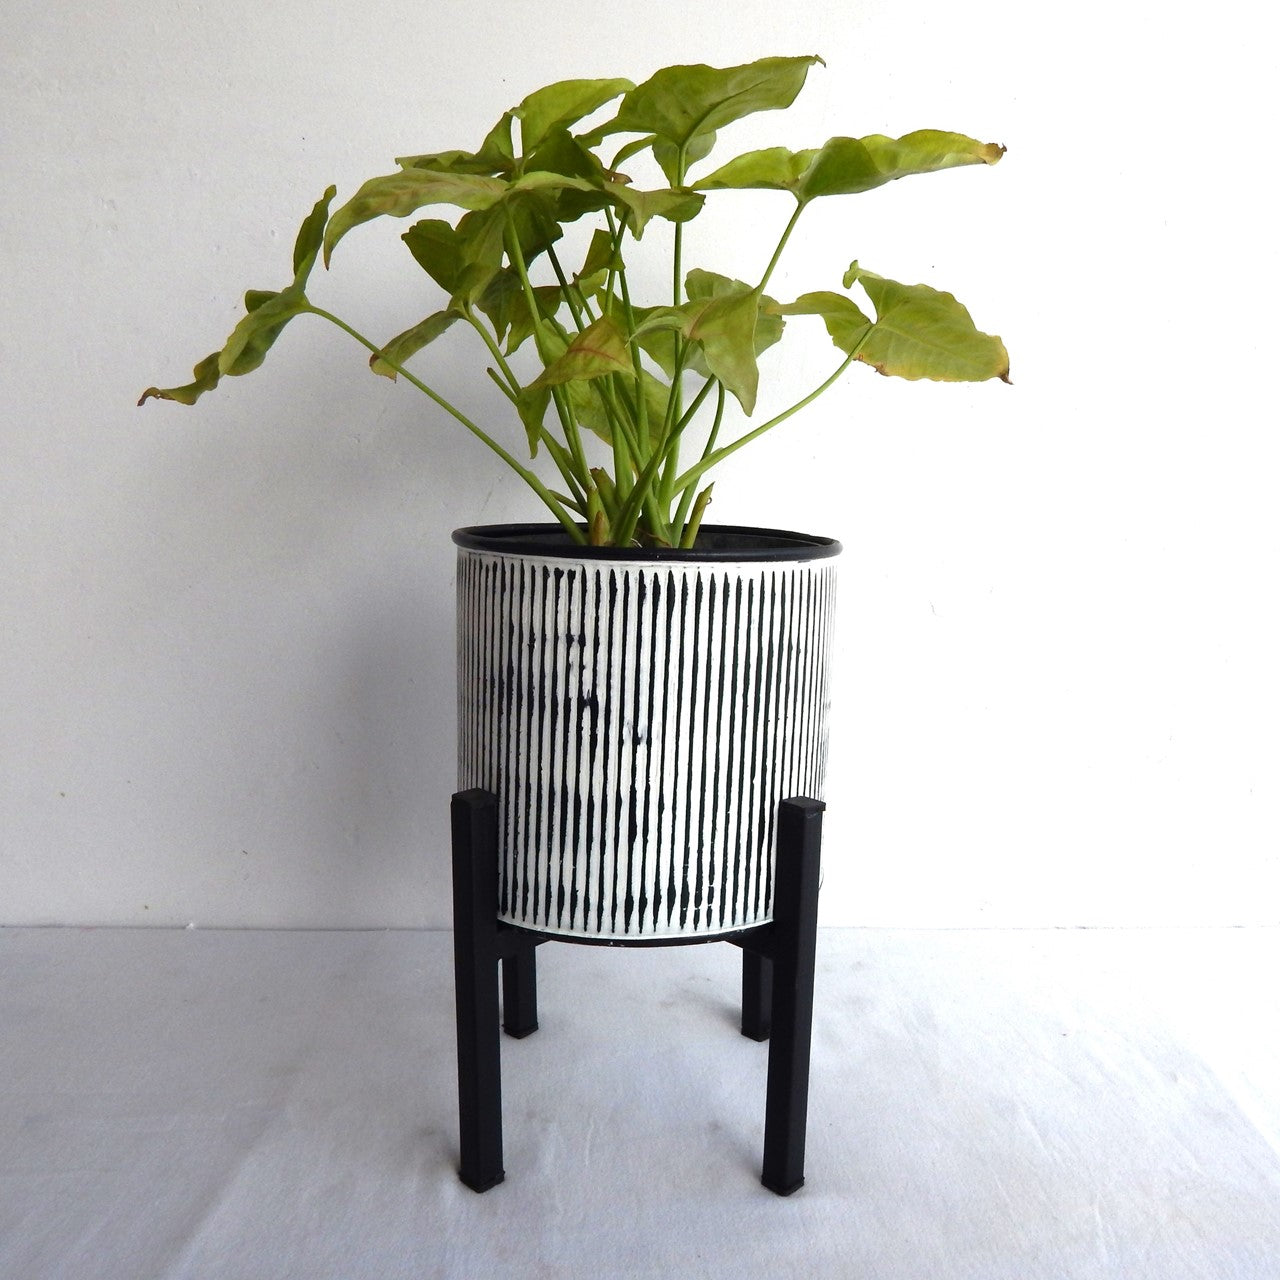 ecofynd 6 inches Jeff Metal Vintage Plant Pot with Stand Planter freeshipping - Ecofynd